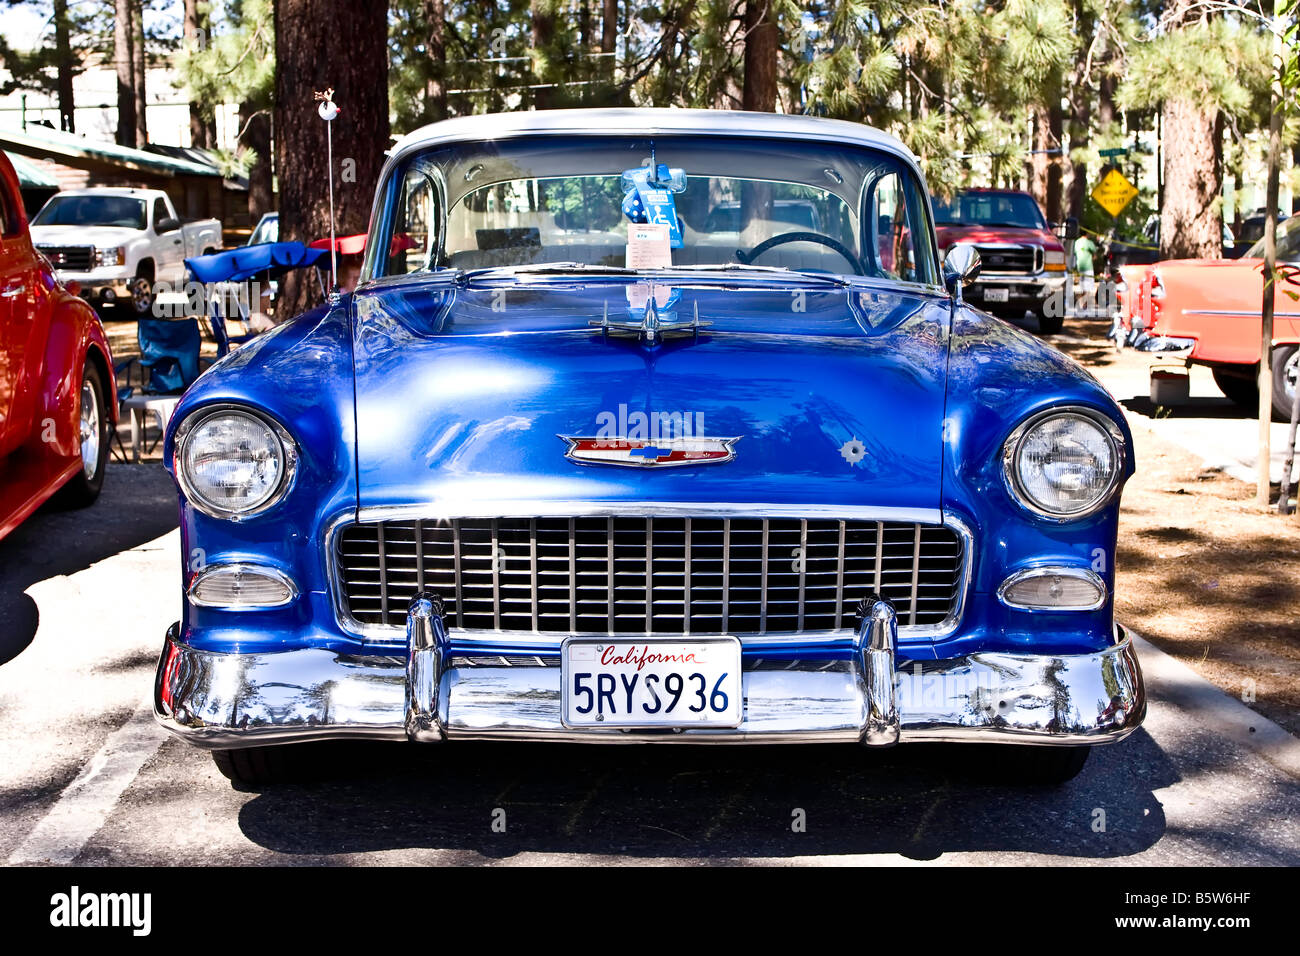 Metallic blue and white 1955 Chevrolet Bel Air coupe Stock Photo - Alamy